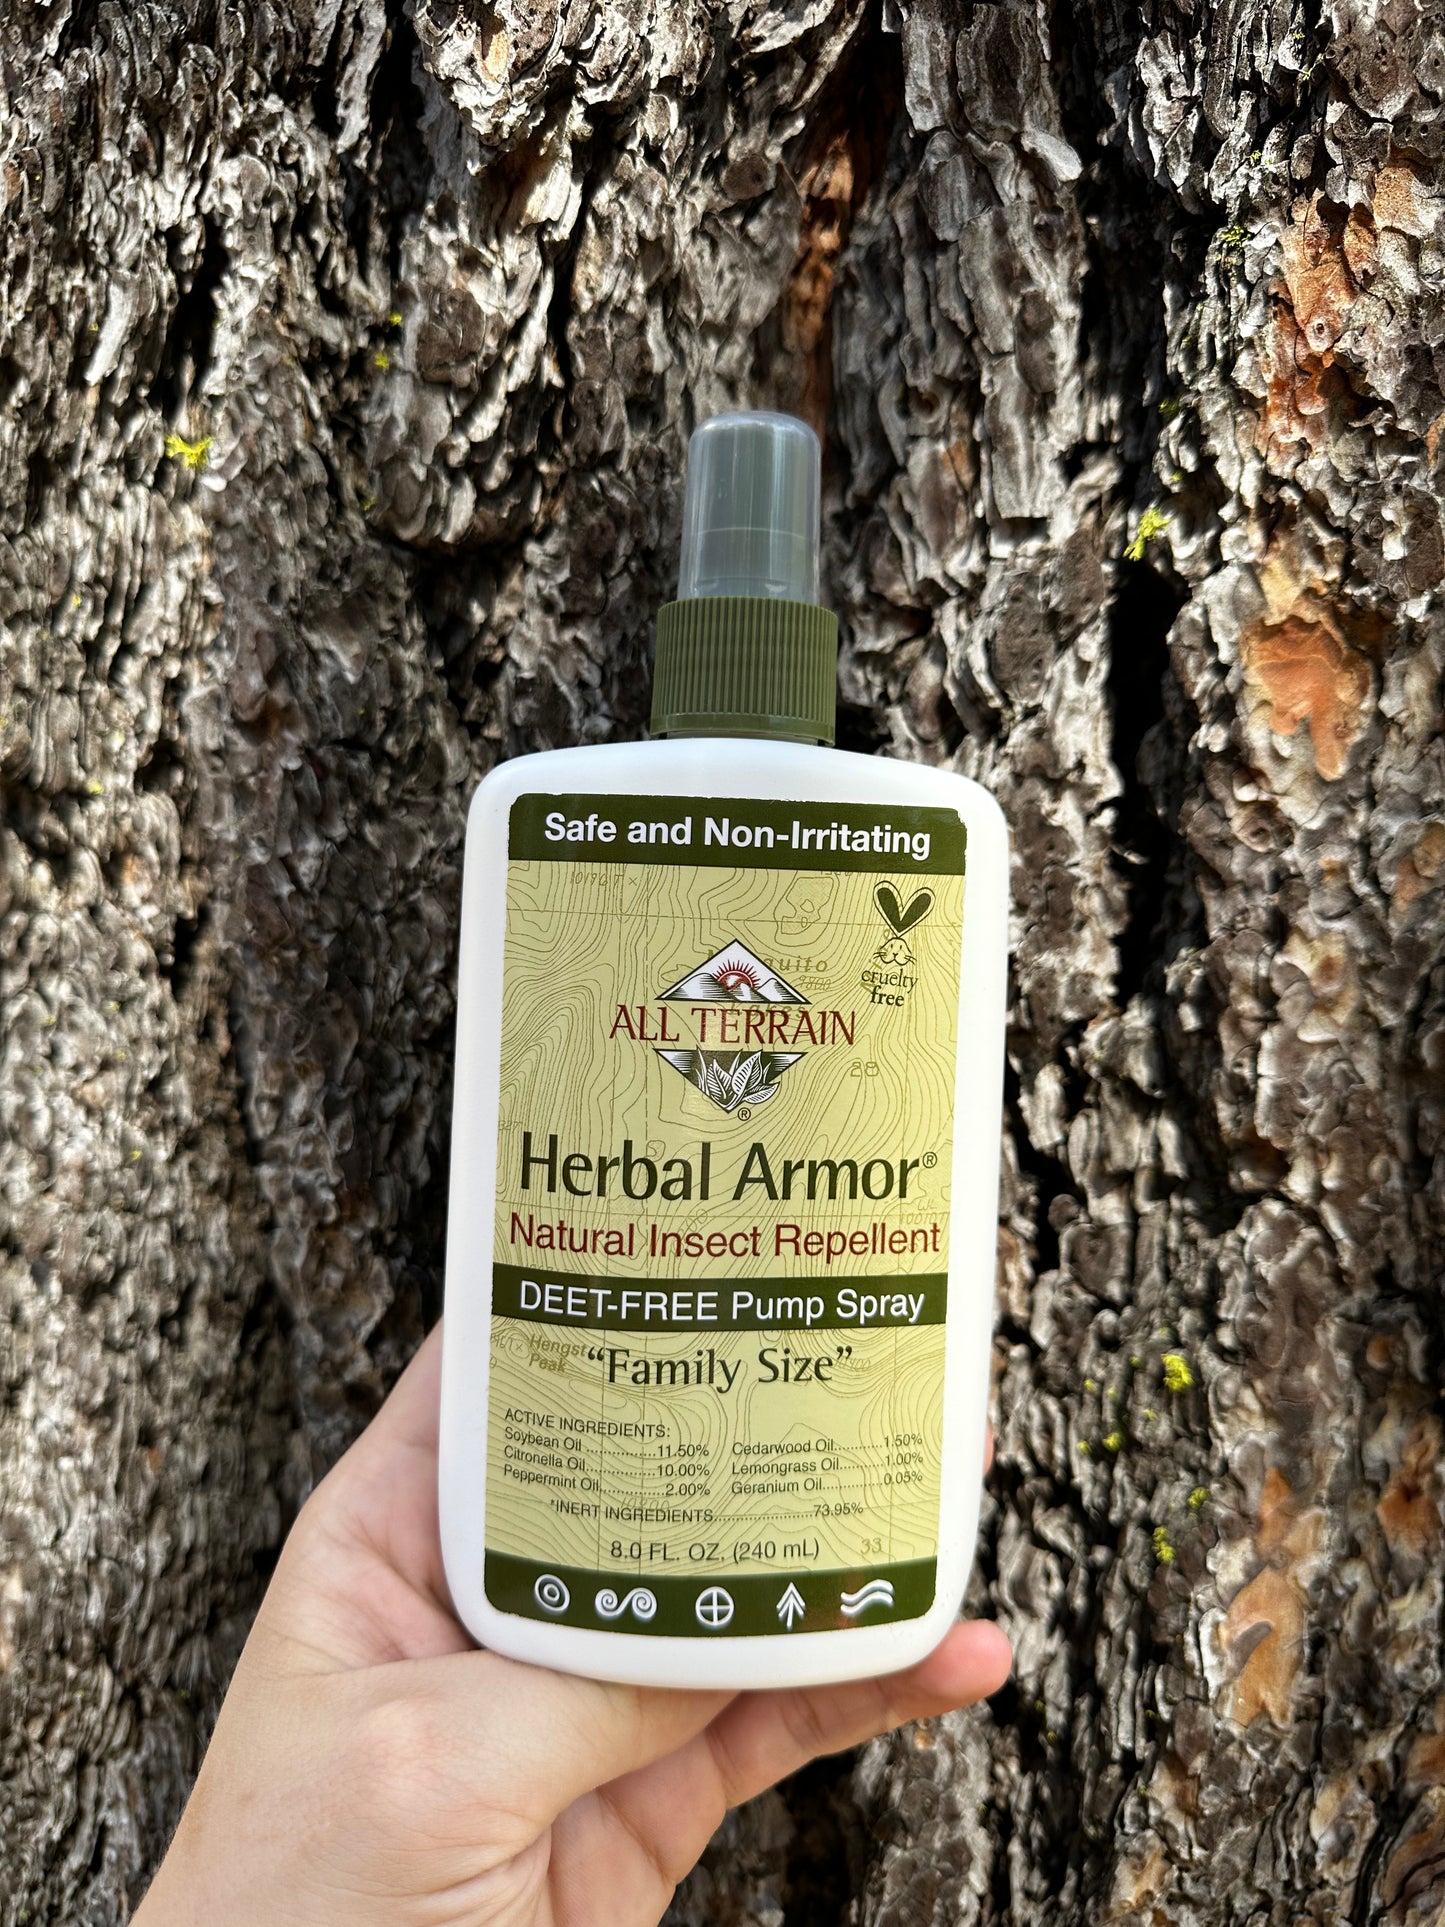 Herbal Armor Natural Bug Repellent "Family Size"